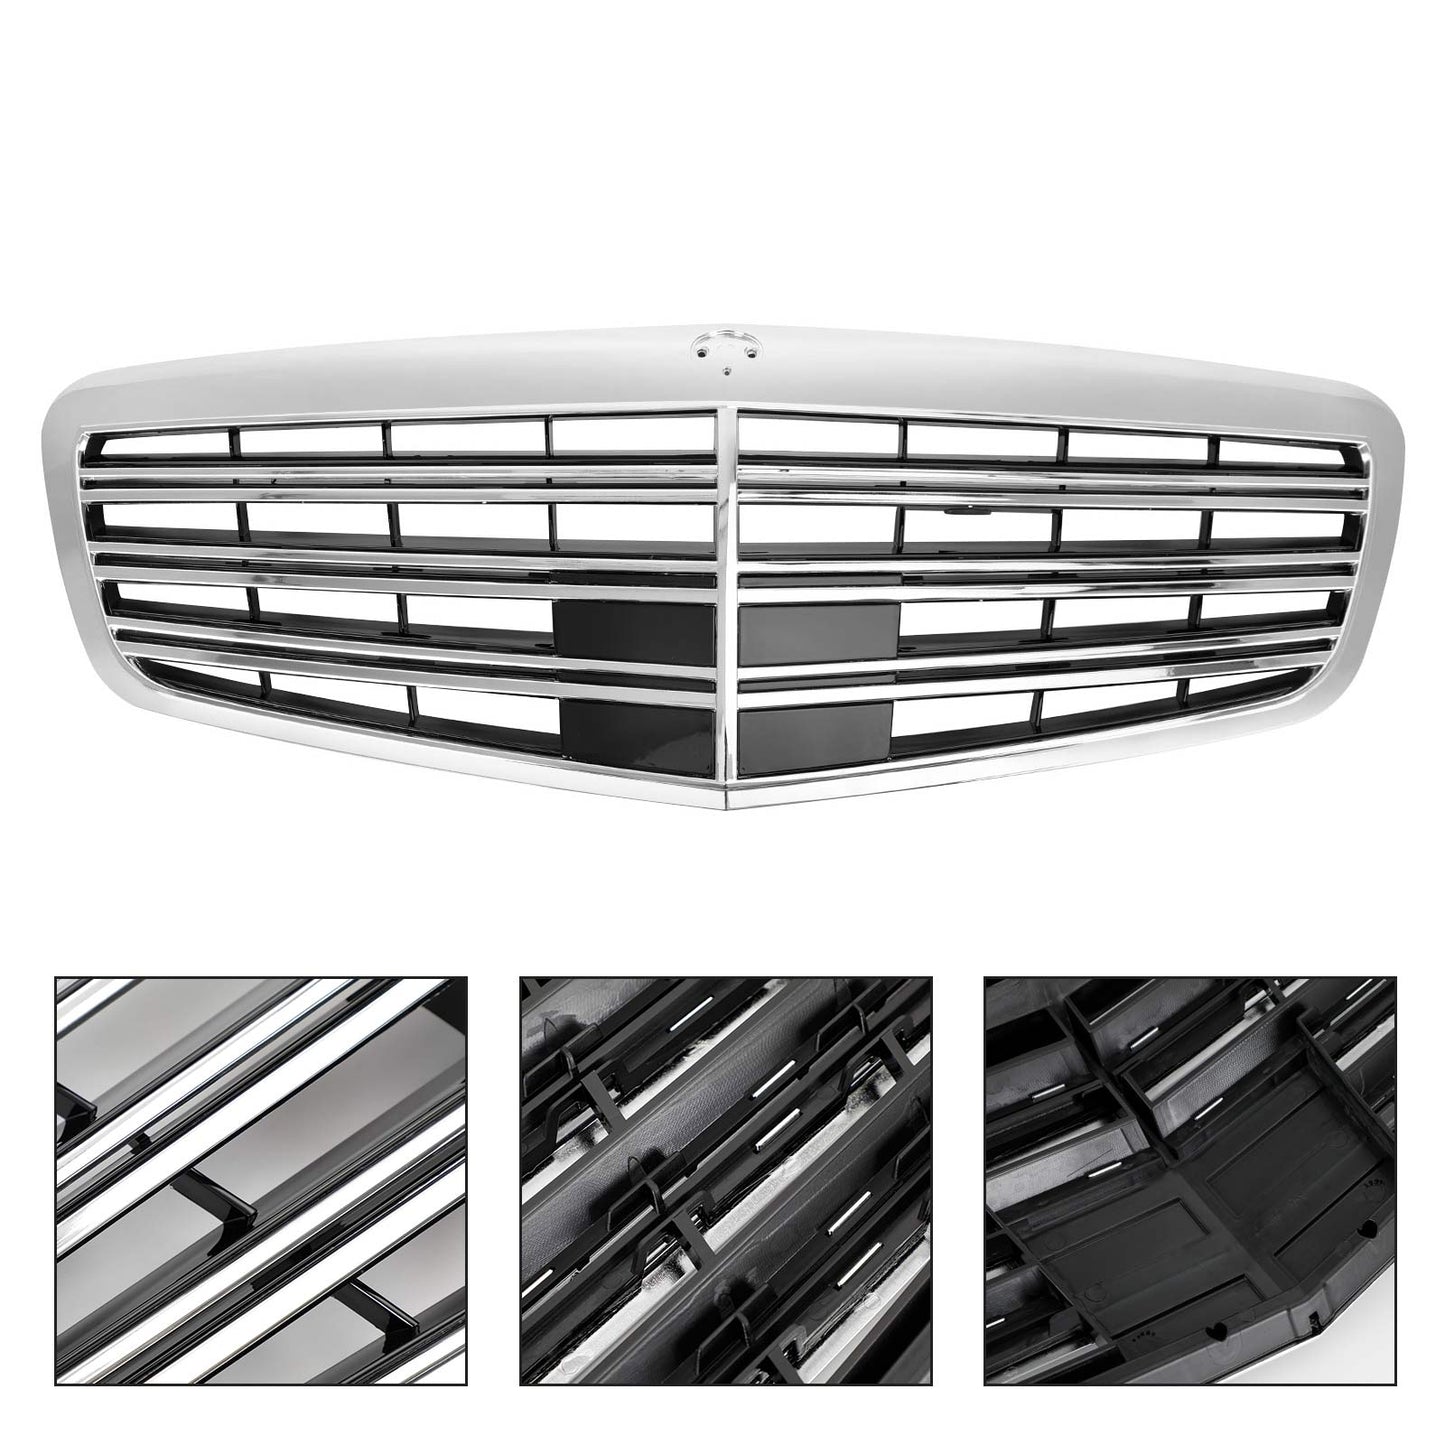 AMG style Front Grille Grill Für Mercedes Benz S-Class W221 S550 S600 S63 S65